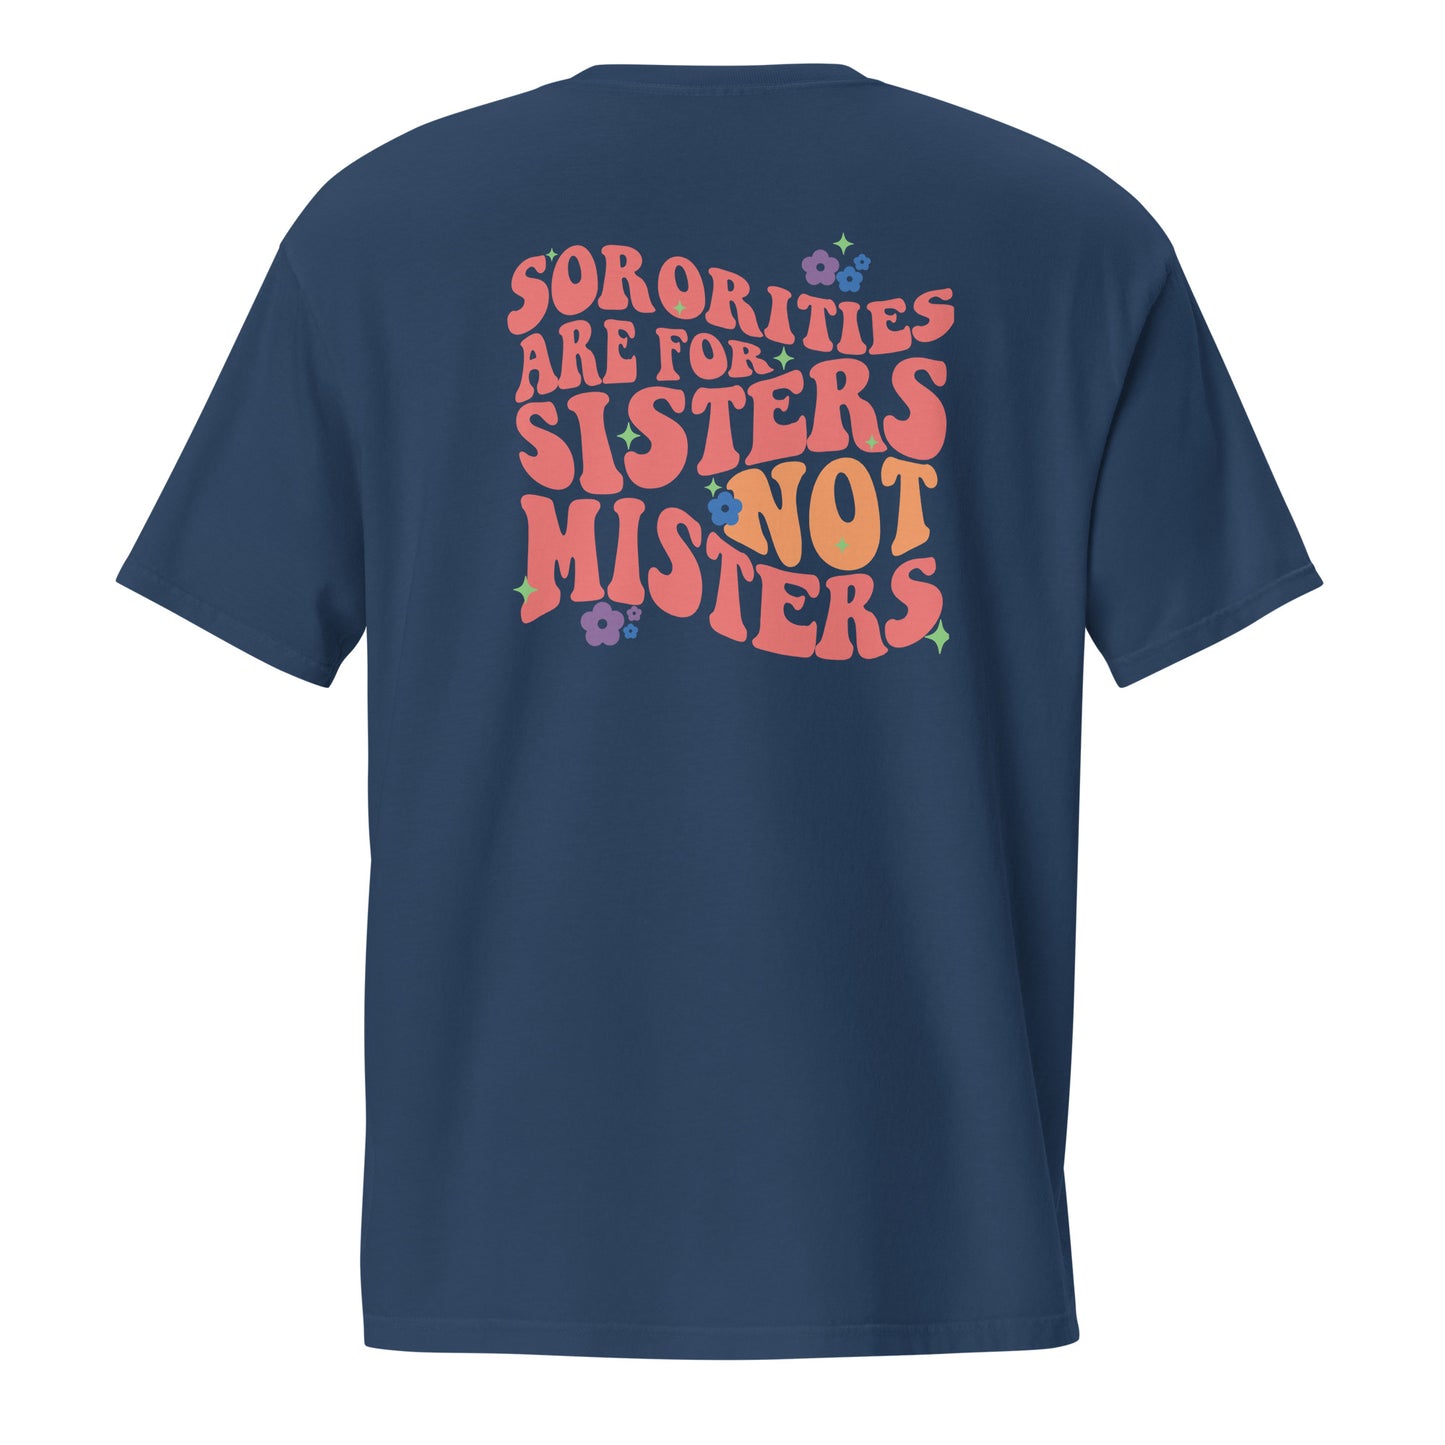 Sororities Are For Sisters | Pocket T-Shirt